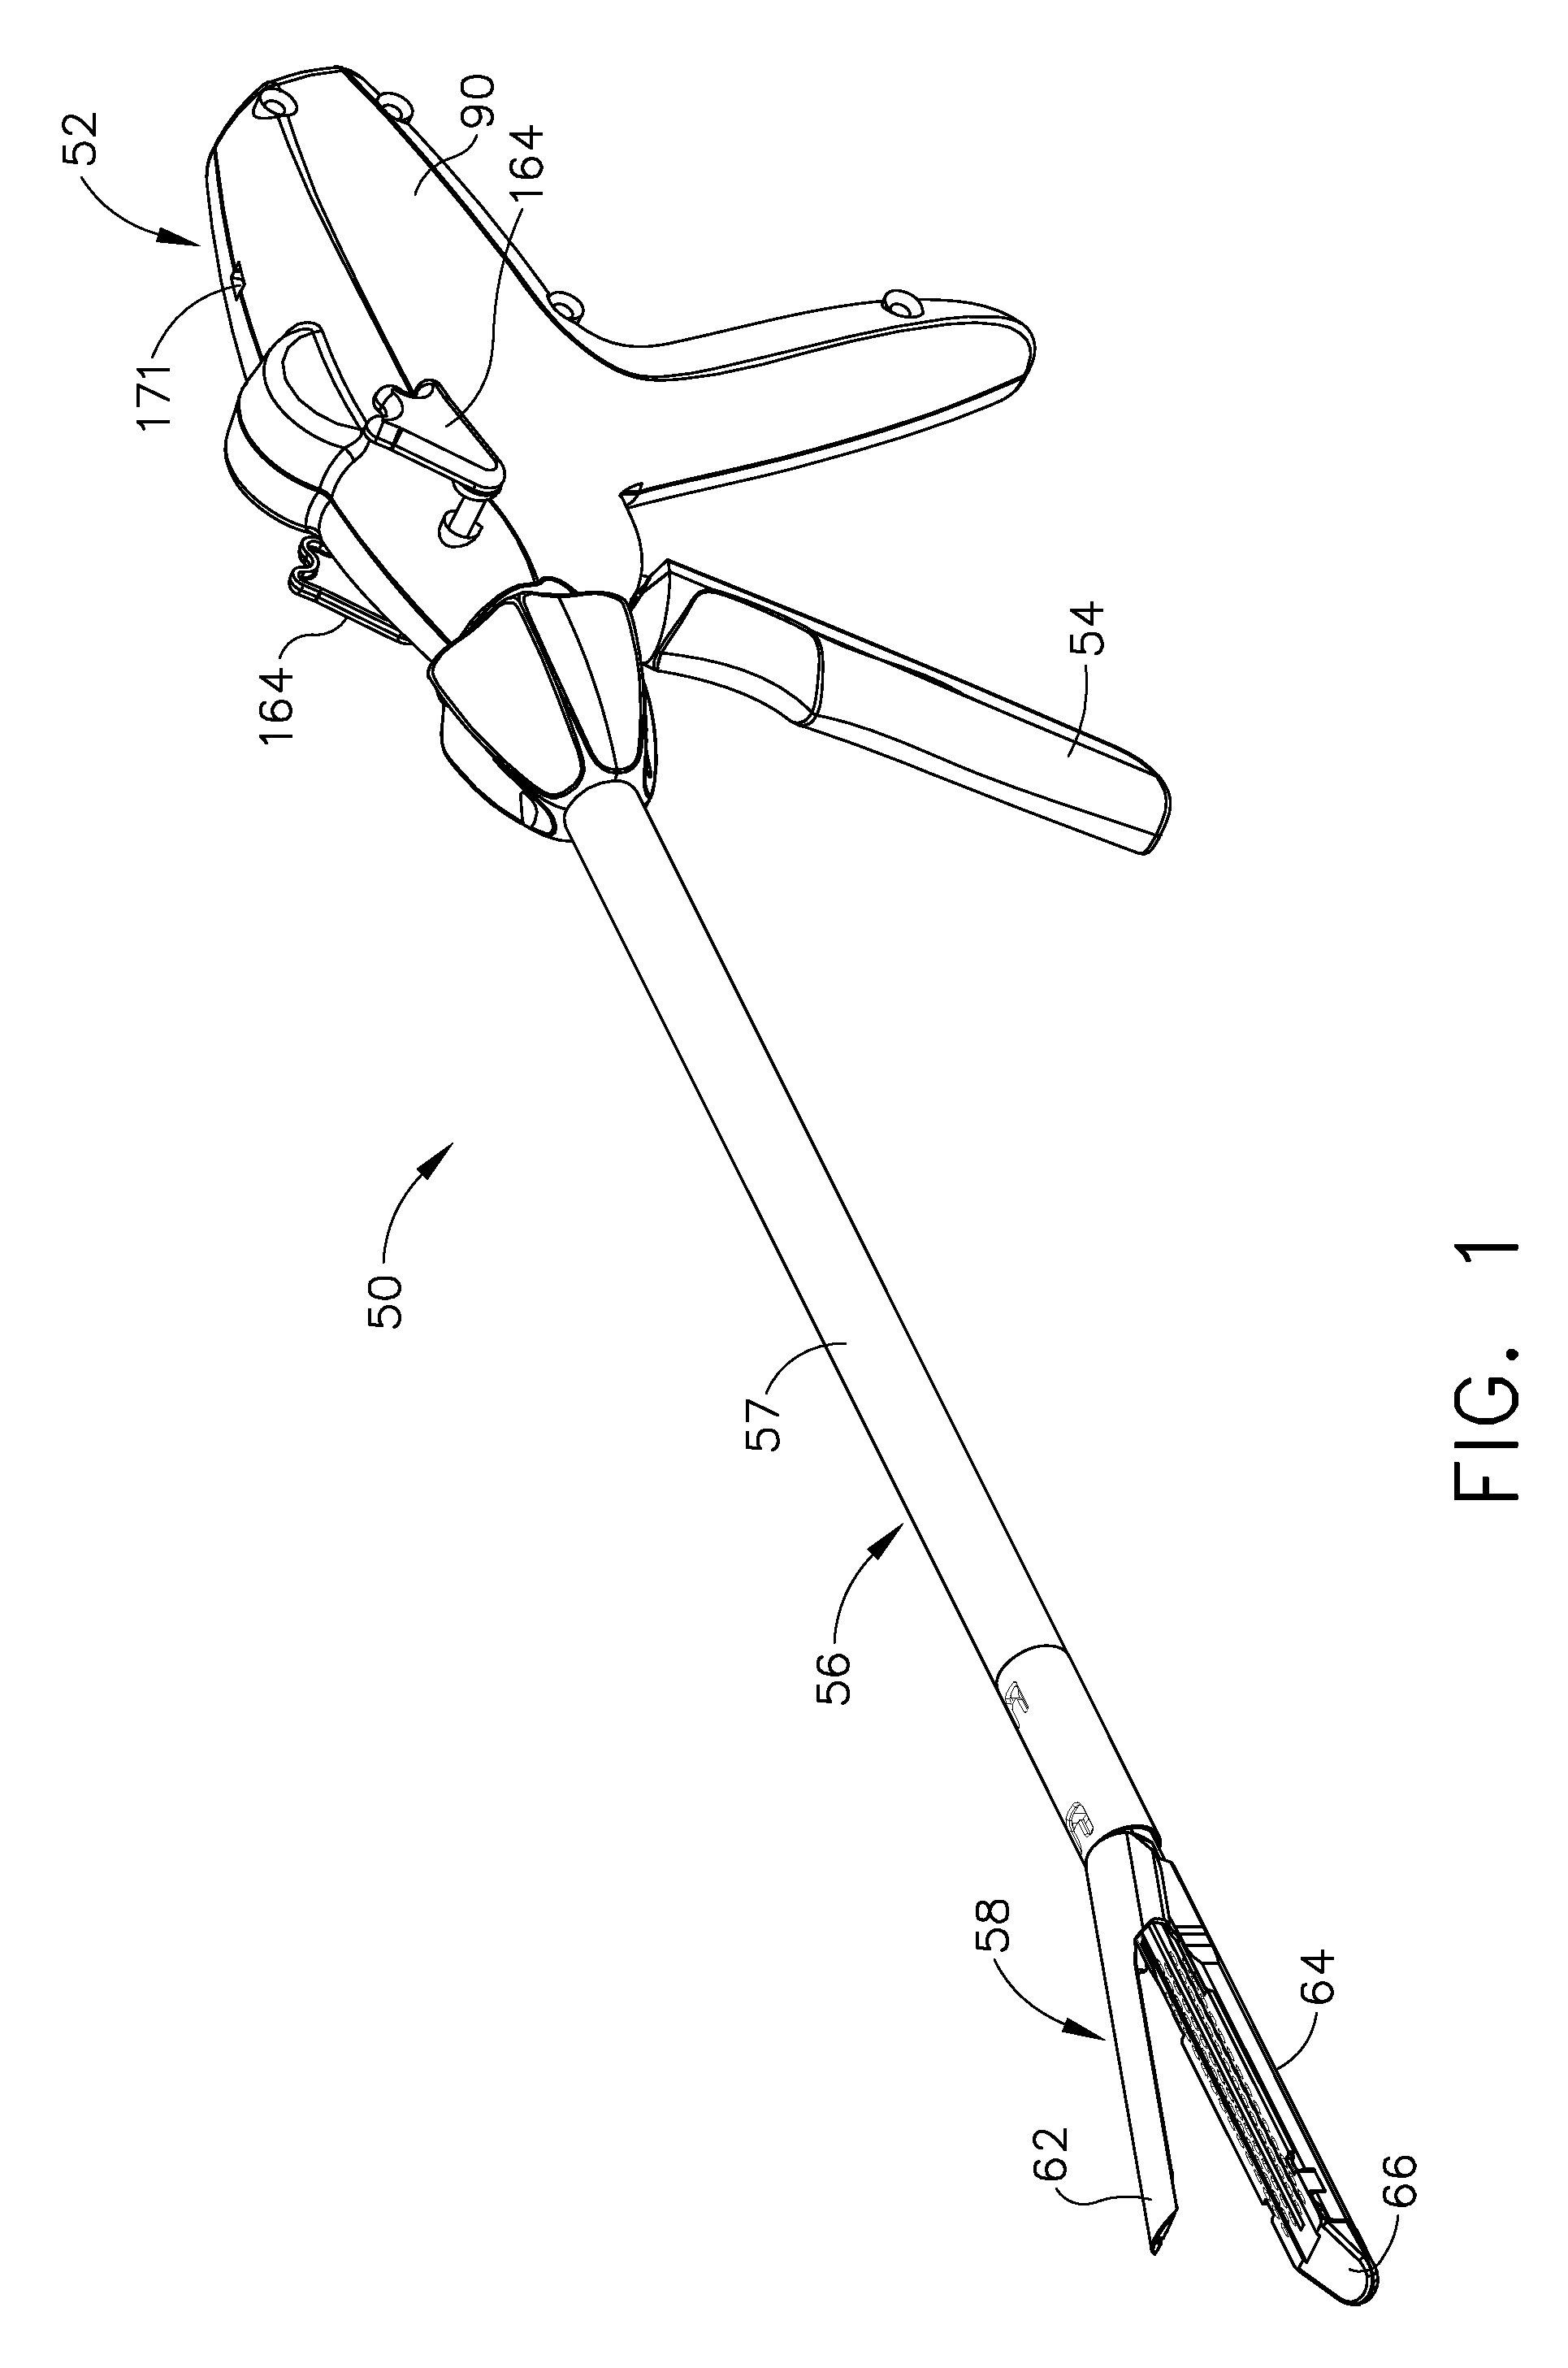 Surgical instrument having a directional switching mechanism